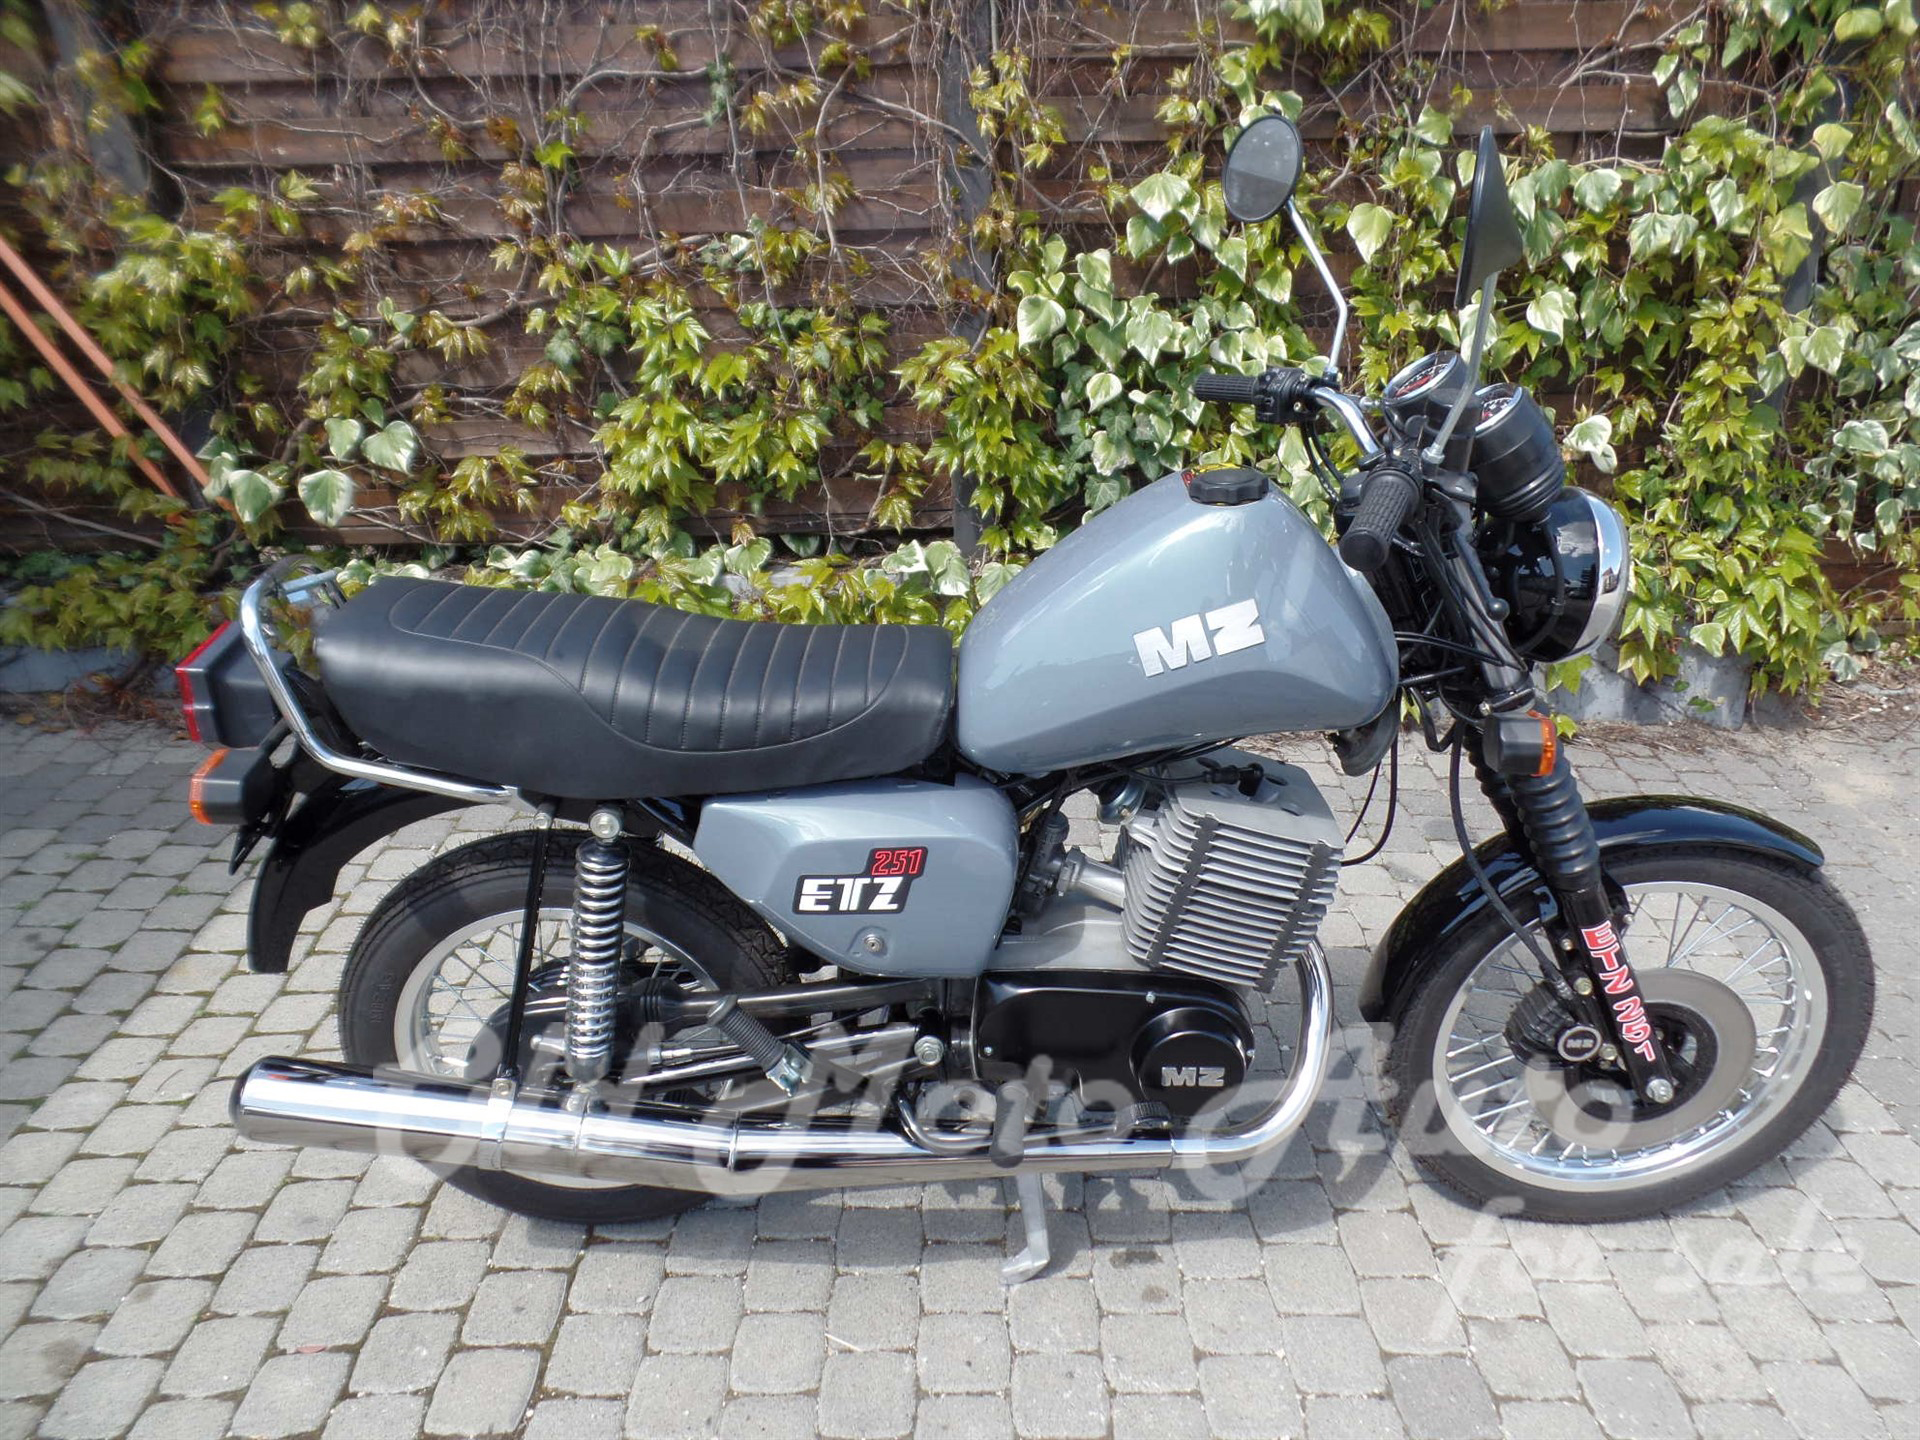 MZ ETZ 251 - Available in several colours!